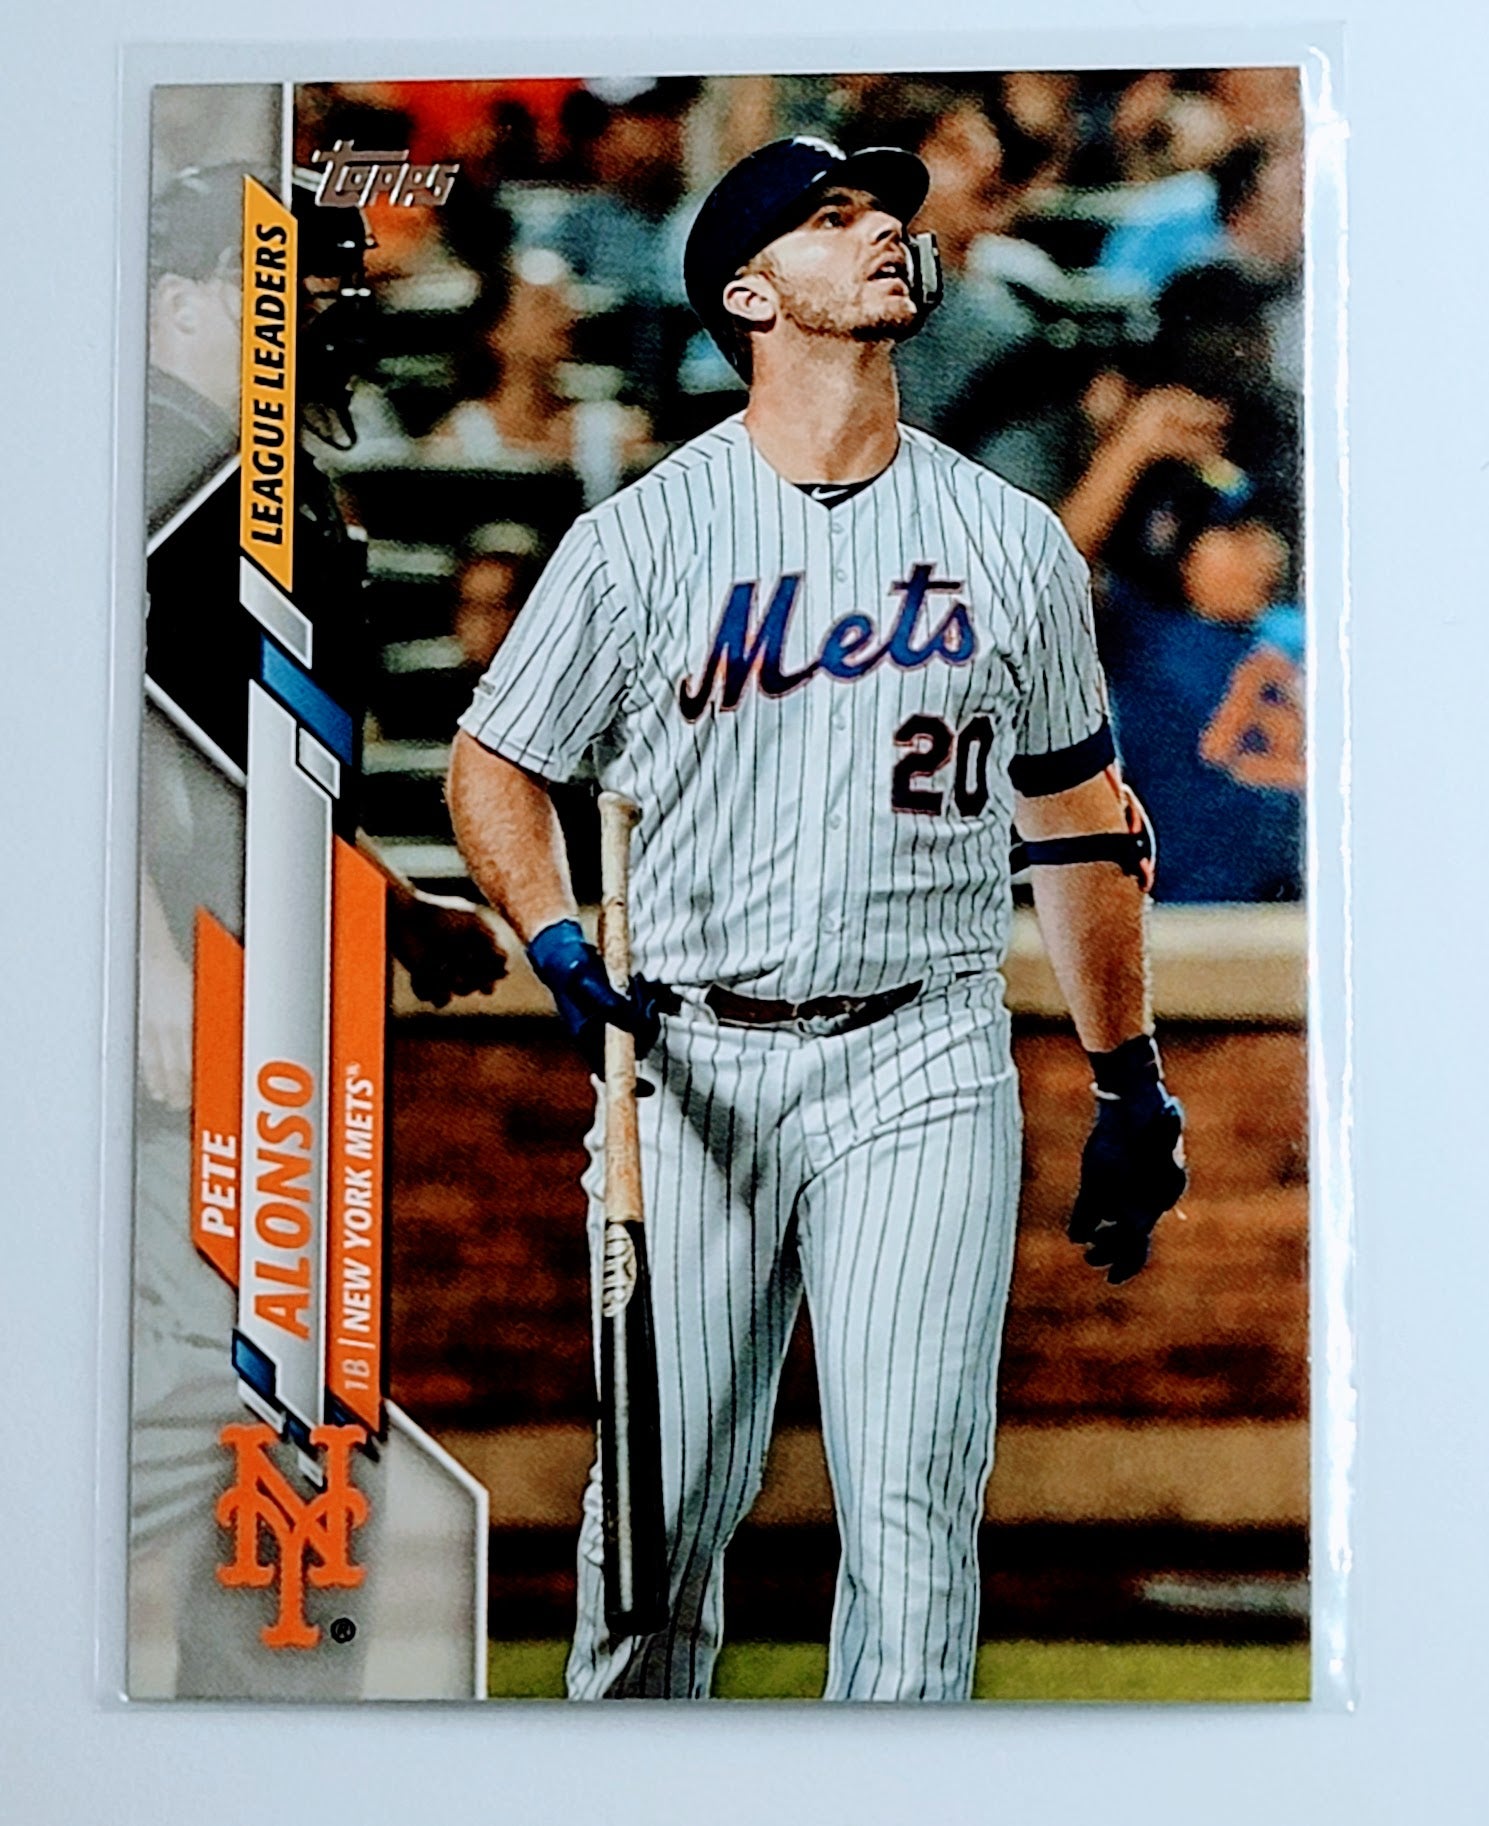 2020 Topps Pete Alonso   LL Baseball Card  TH13C_1a simple Xclusive Collectibles   